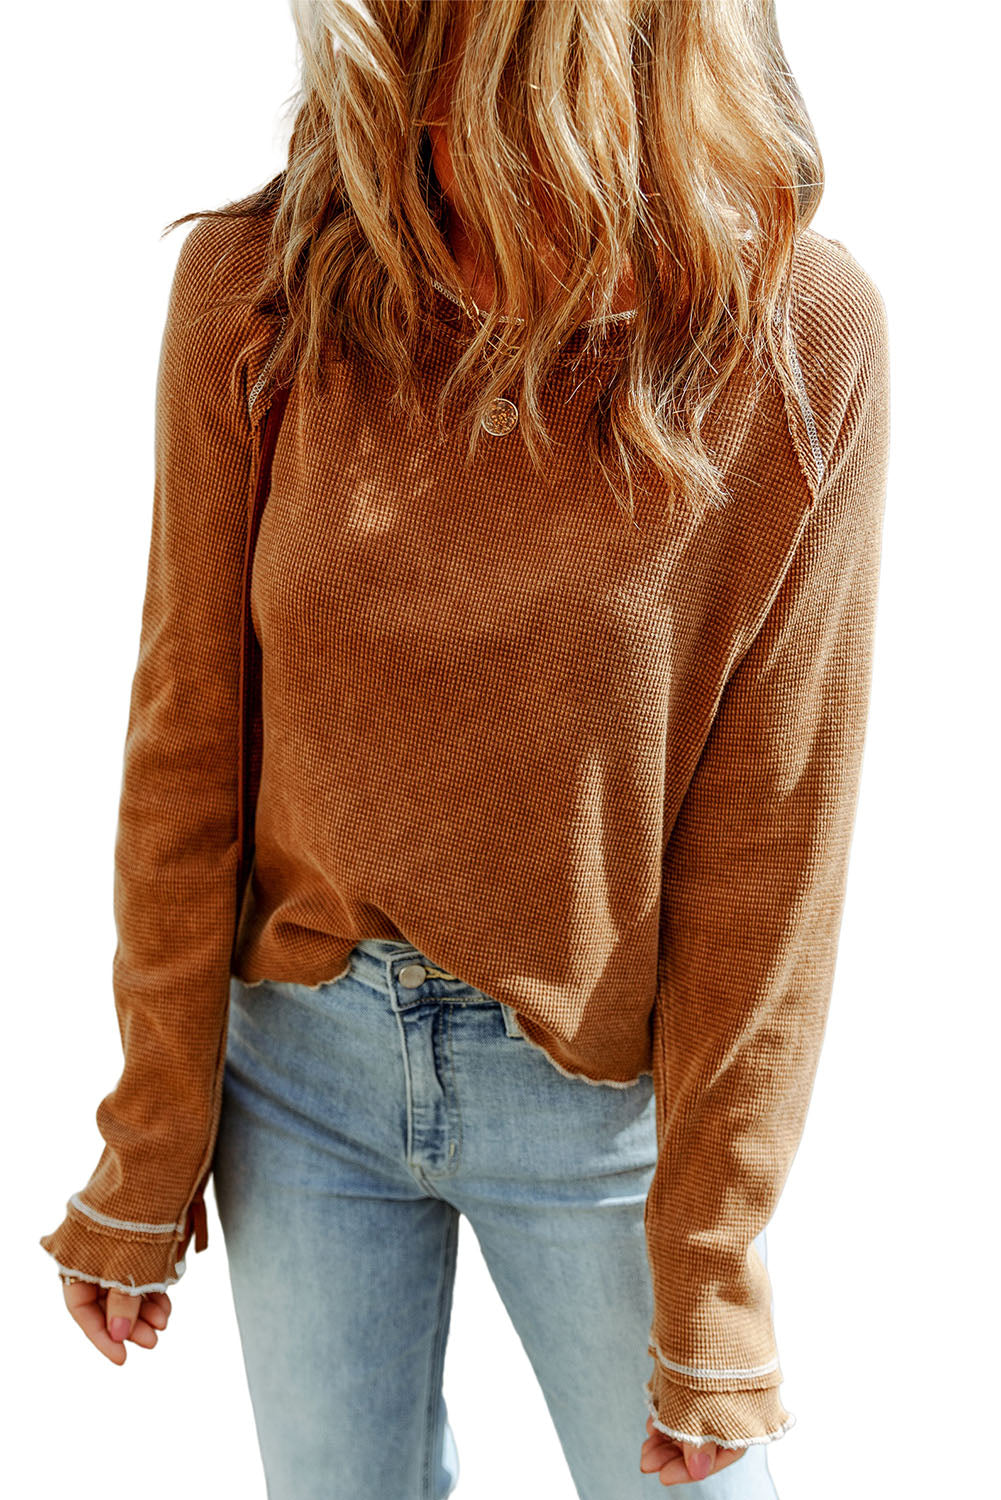 Blue Textured Round Neck Long Sleeve Top